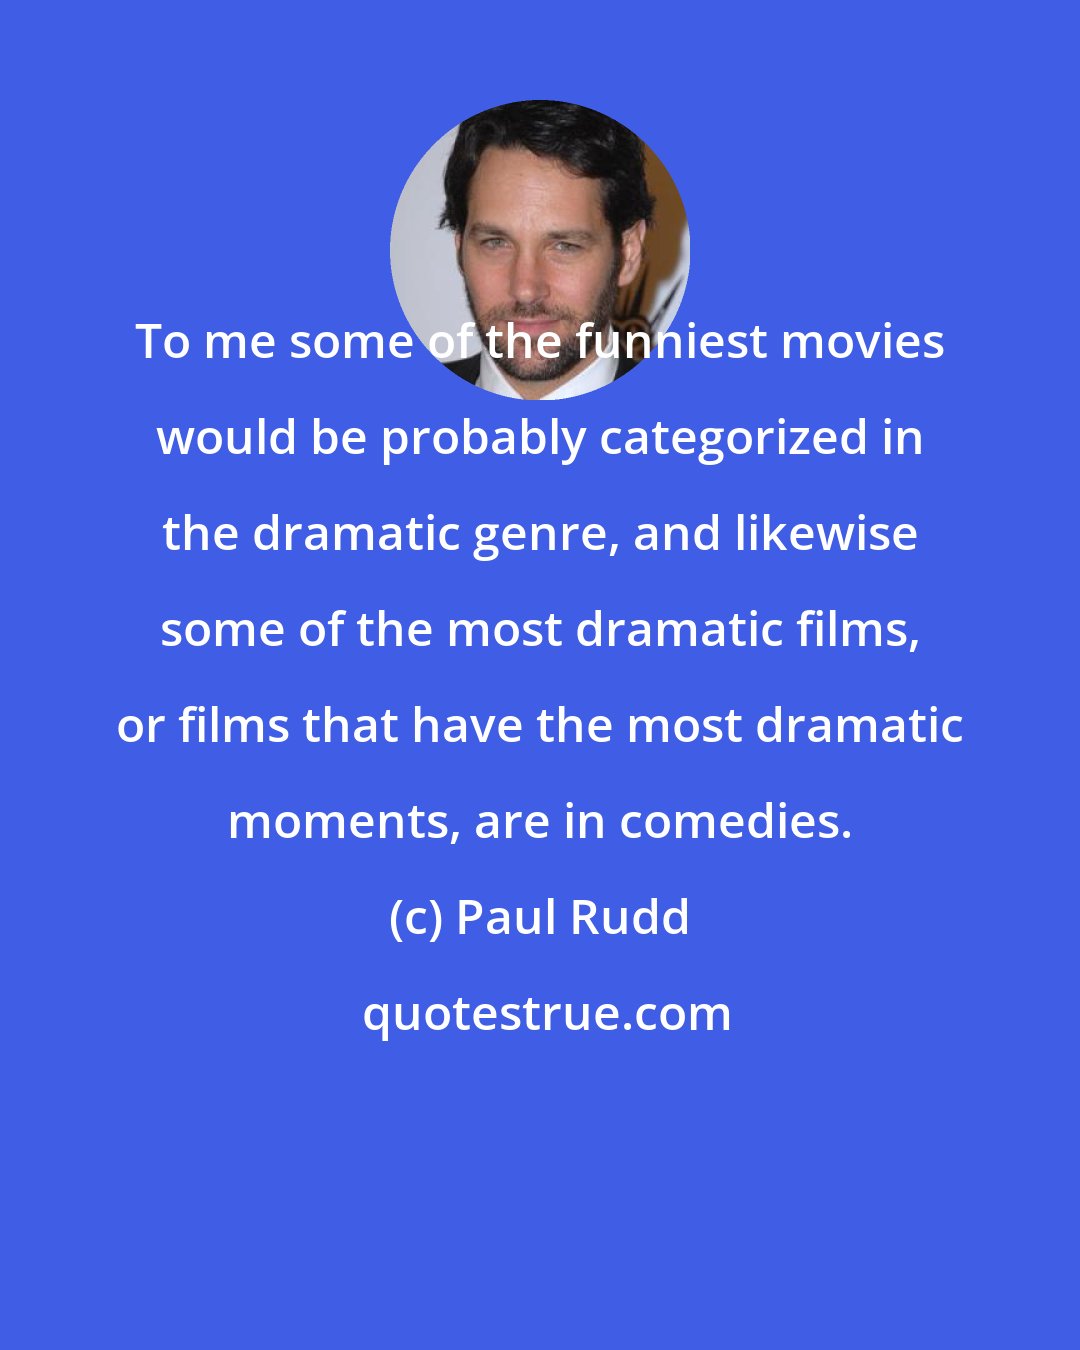 Paul Rudd: To me some of the funniest movies would be probably categorized in the dramatic genre, and likewise some of the most dramatic films, or films that have the most dramatic moments, are in comedies.